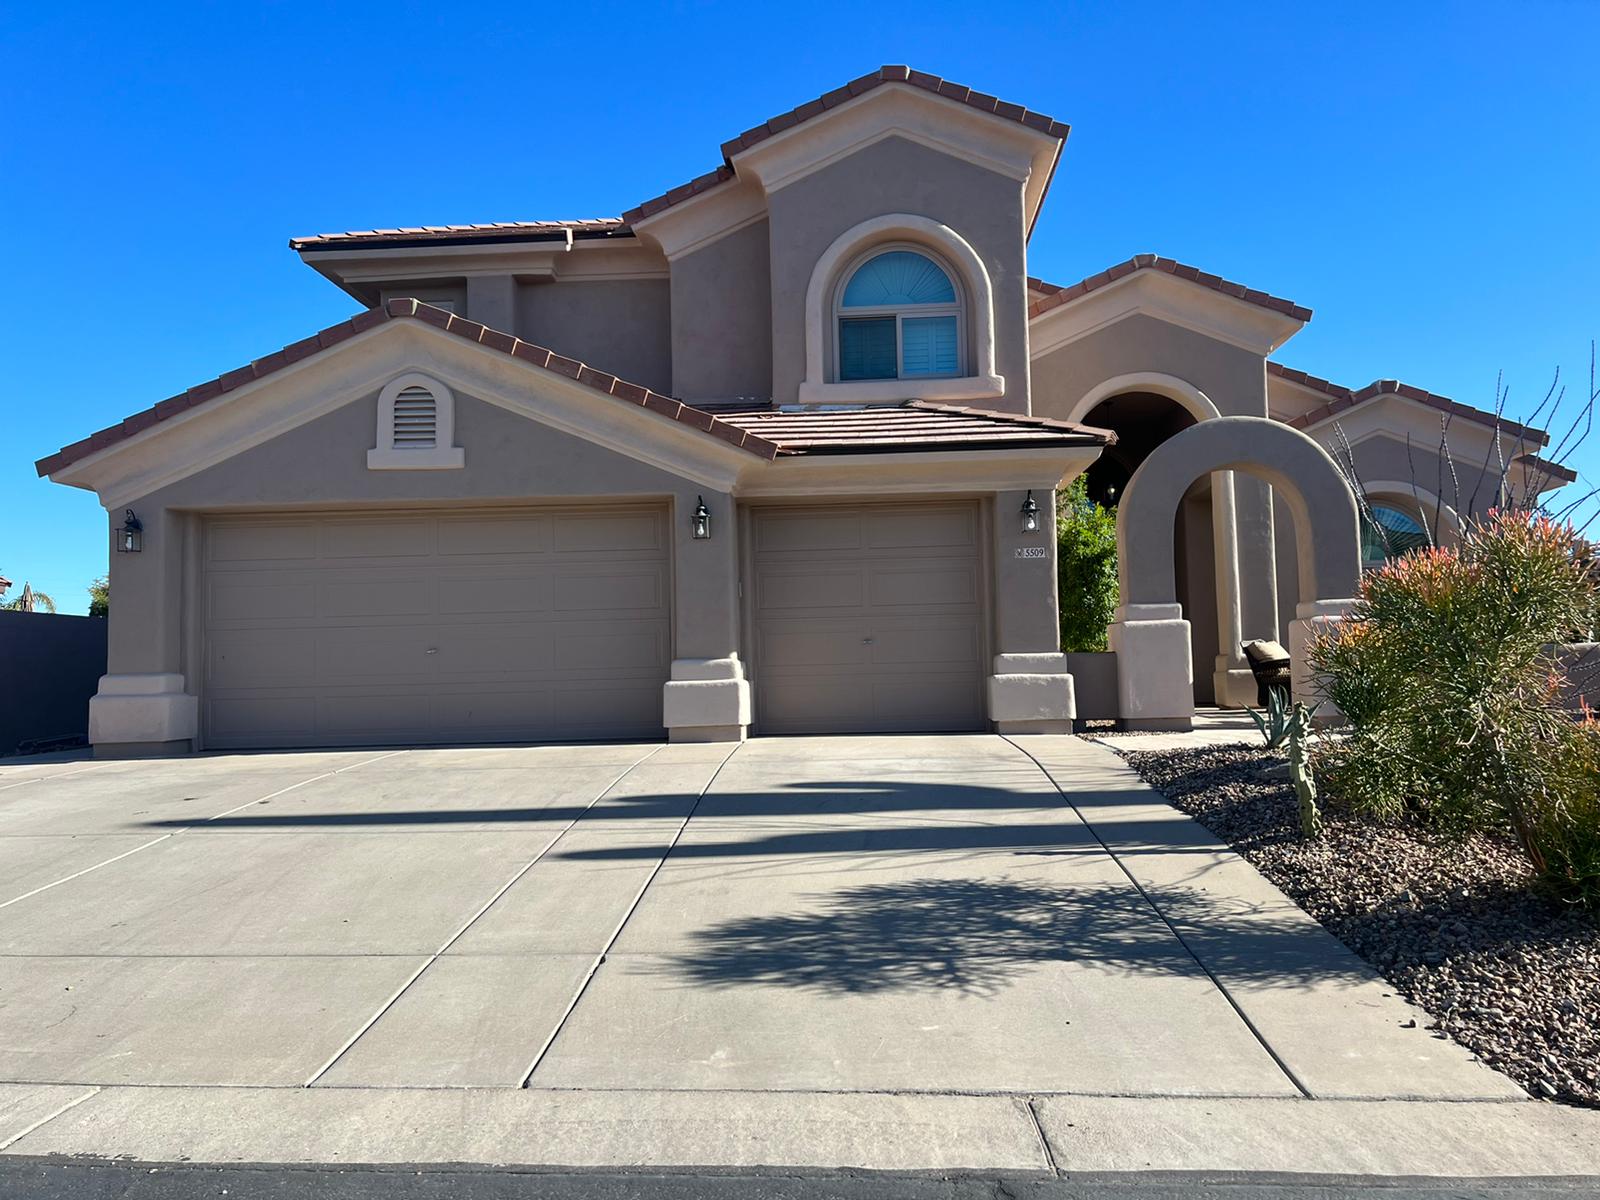 Home in Tempe showcasing a beautifully replaced tile roof by local roofing services.